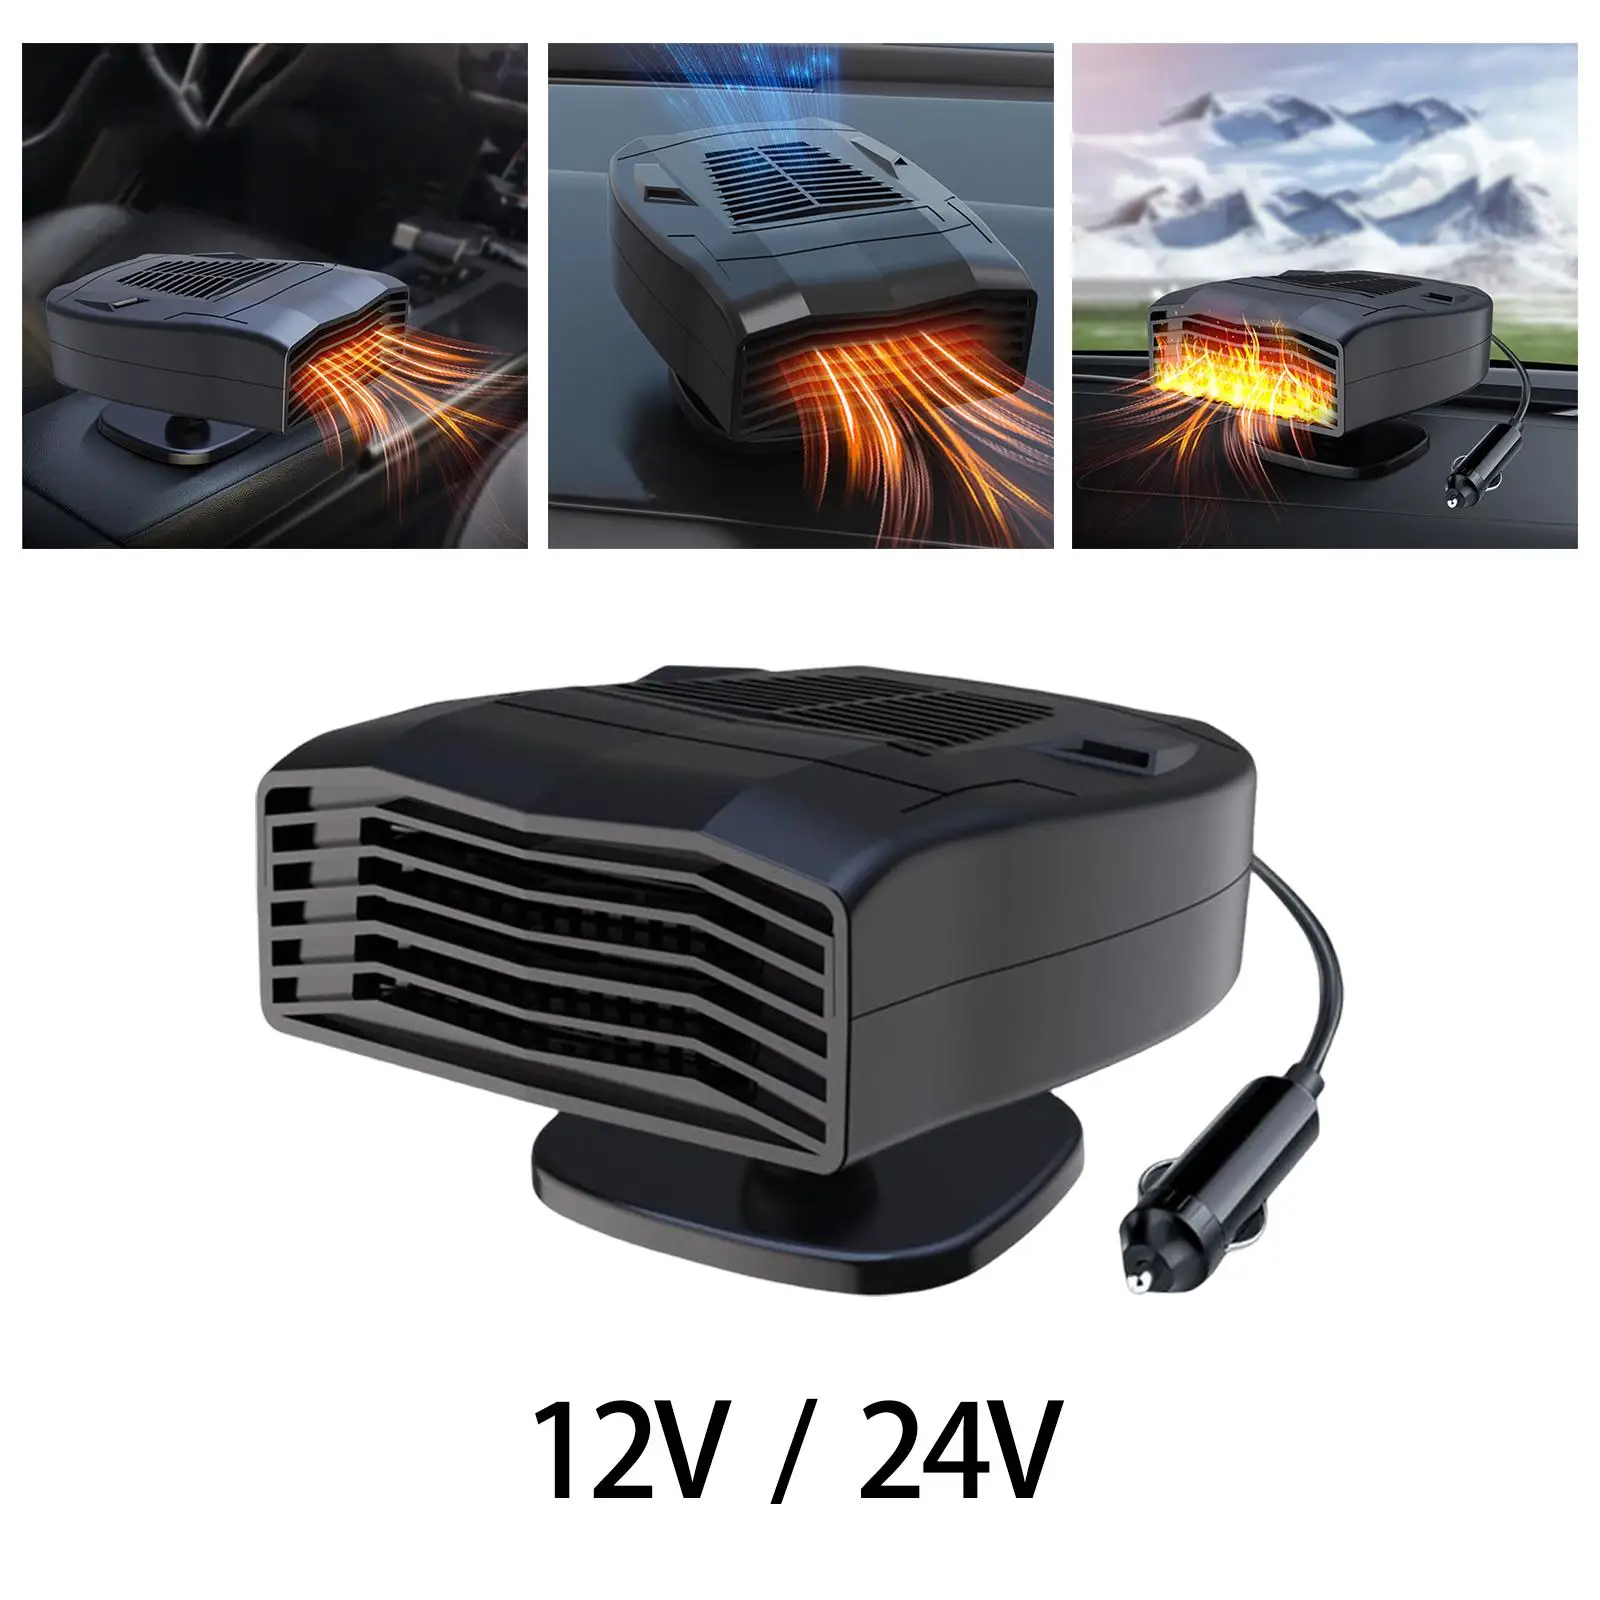 Car Heater 360 Degree Rotating Windshield Defrosting for Automobile Bus